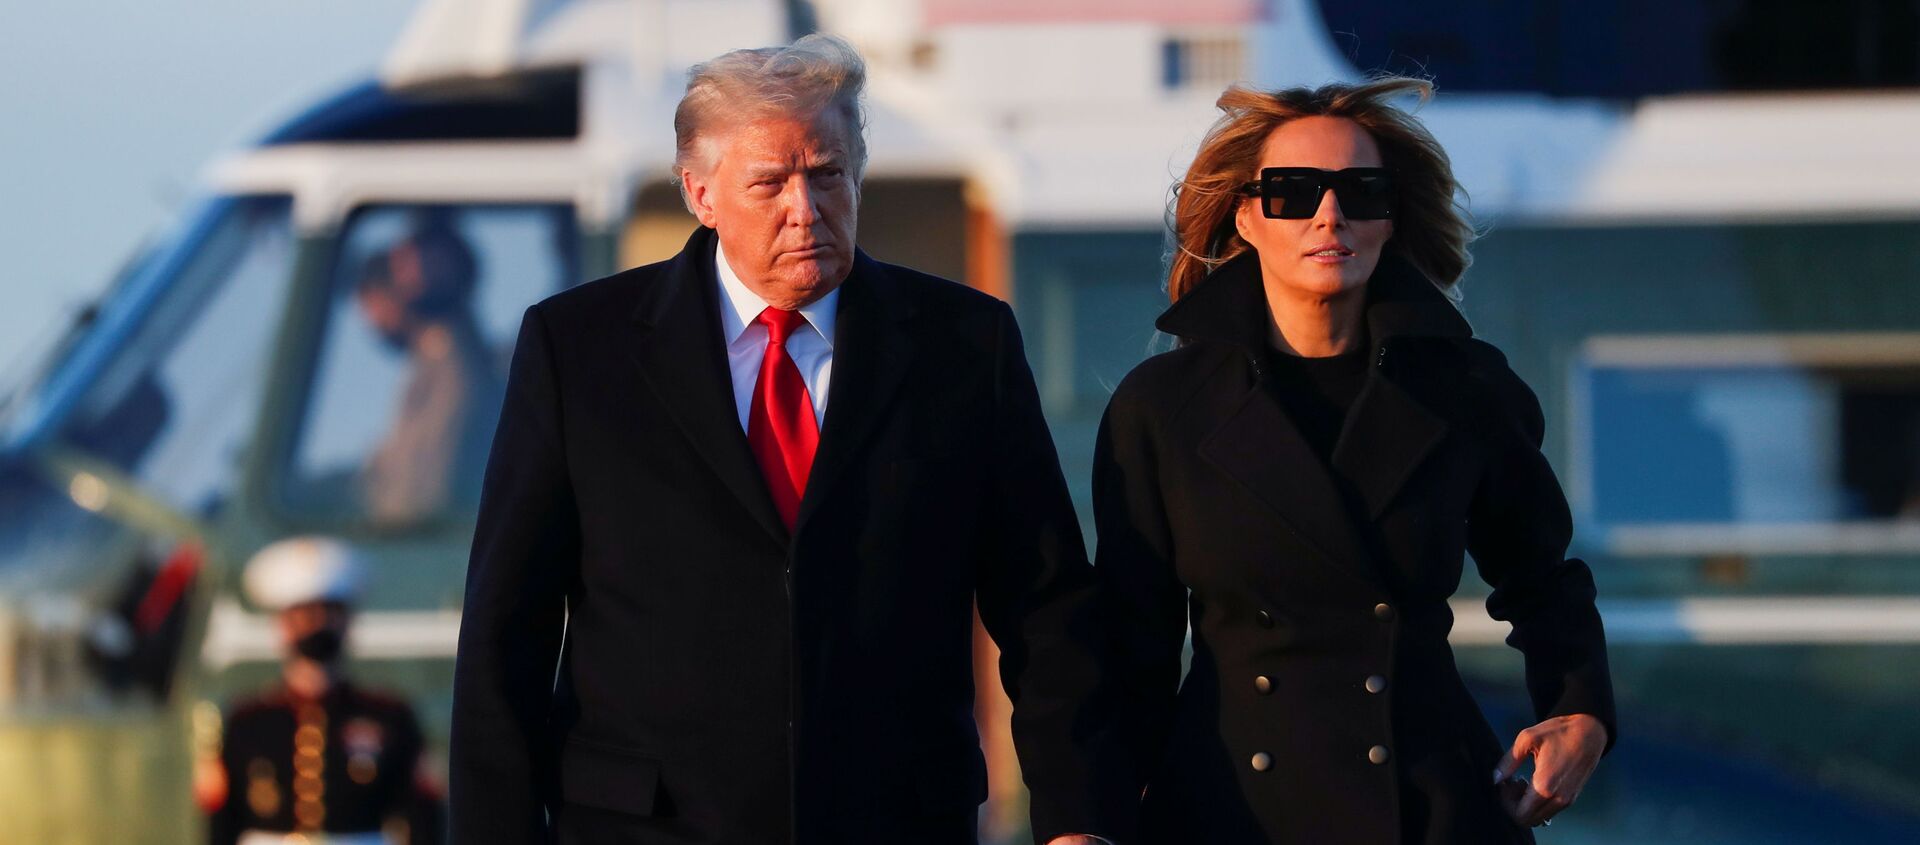 U.S. President Donald Trump and first lady Melania Trump prepare to board Air Force One at Joint Base Andrews in Maryland, U.S., December 23, 2020. - Sputnik International, 1920, 25.12.2020